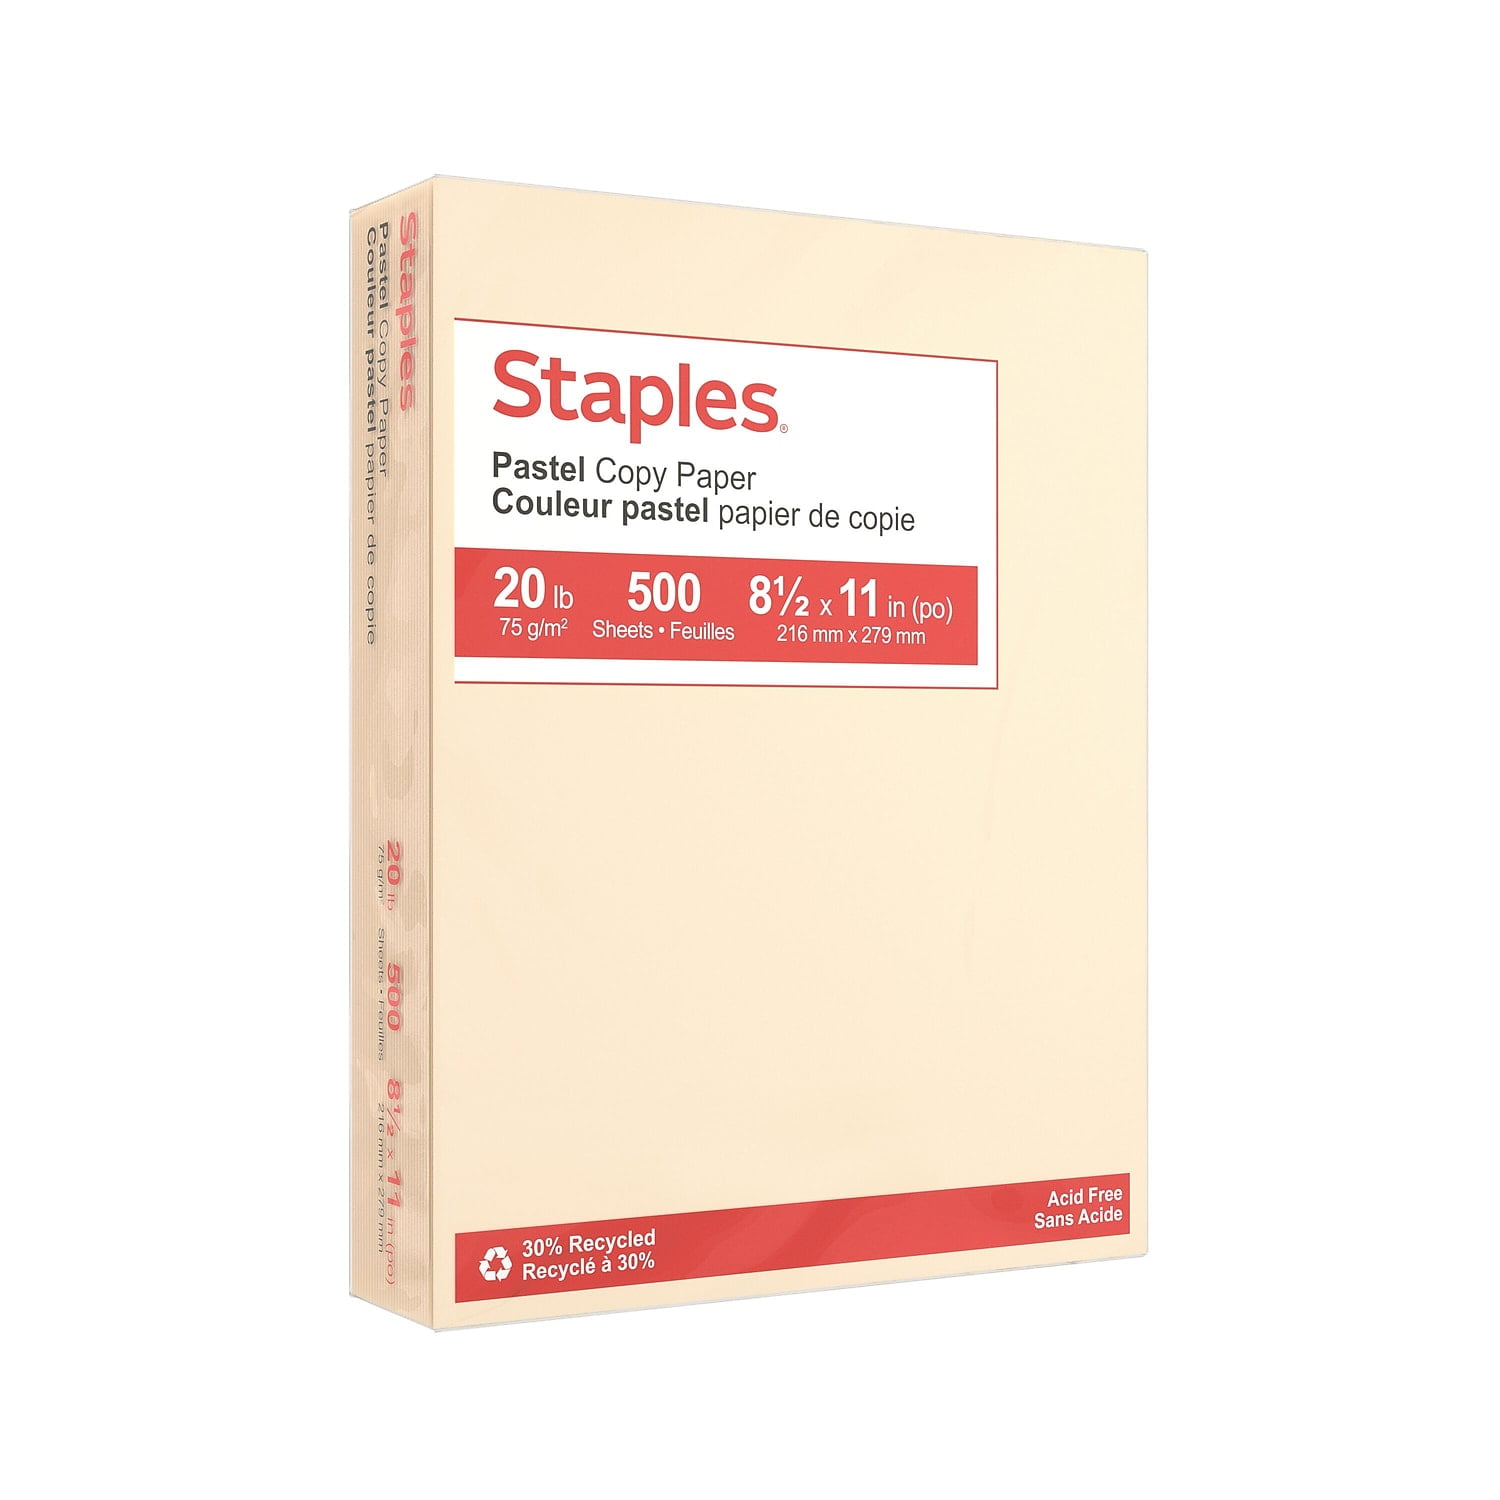 Staples Pastels Pink Colored Paper 8.5 x 11 500 Sheets New Sealed